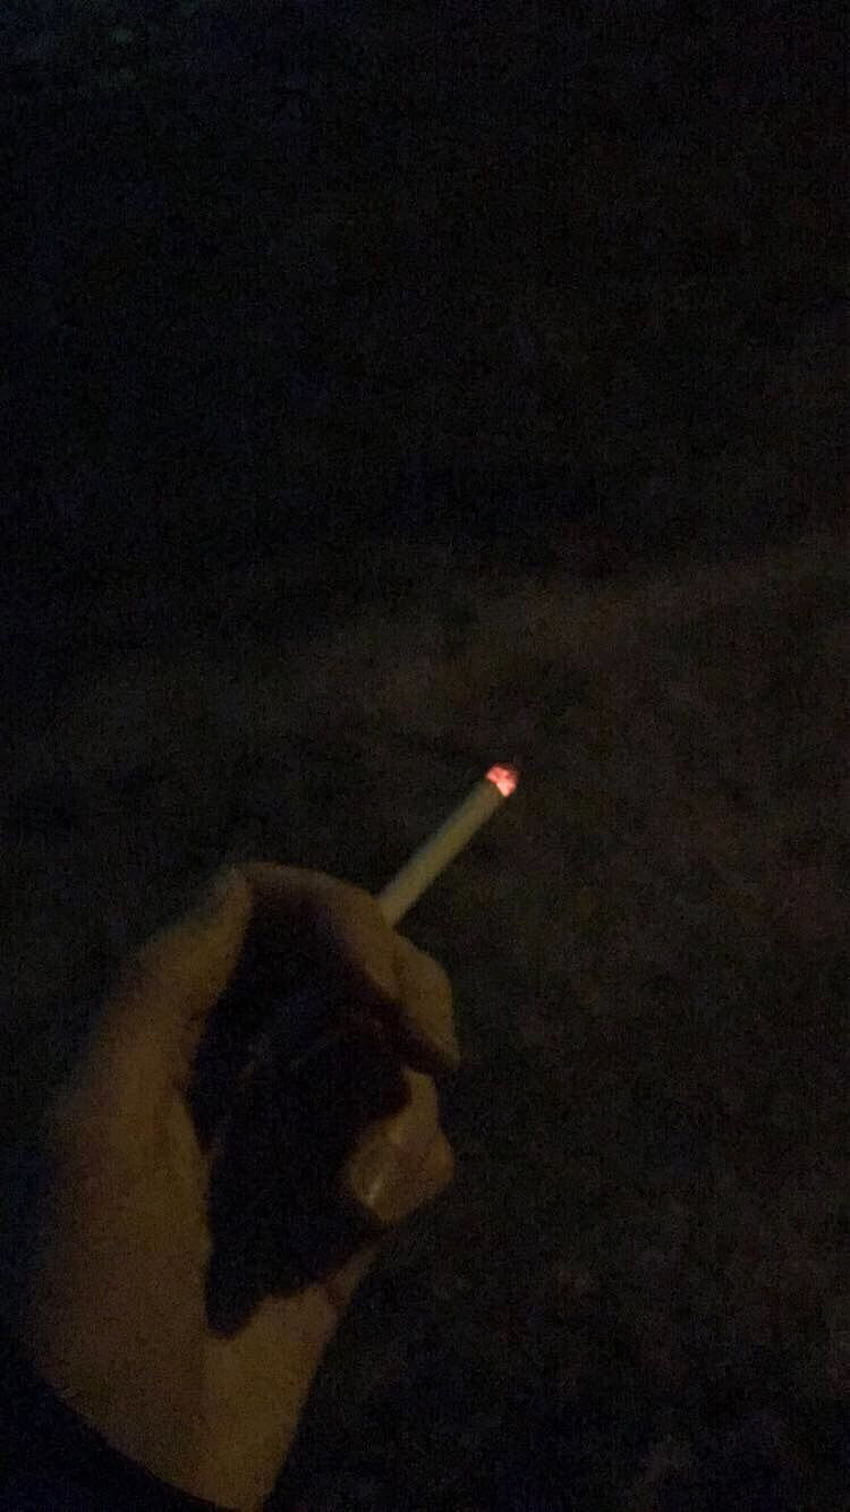 A person is holding a lit cigarette in their hand. - Smoke